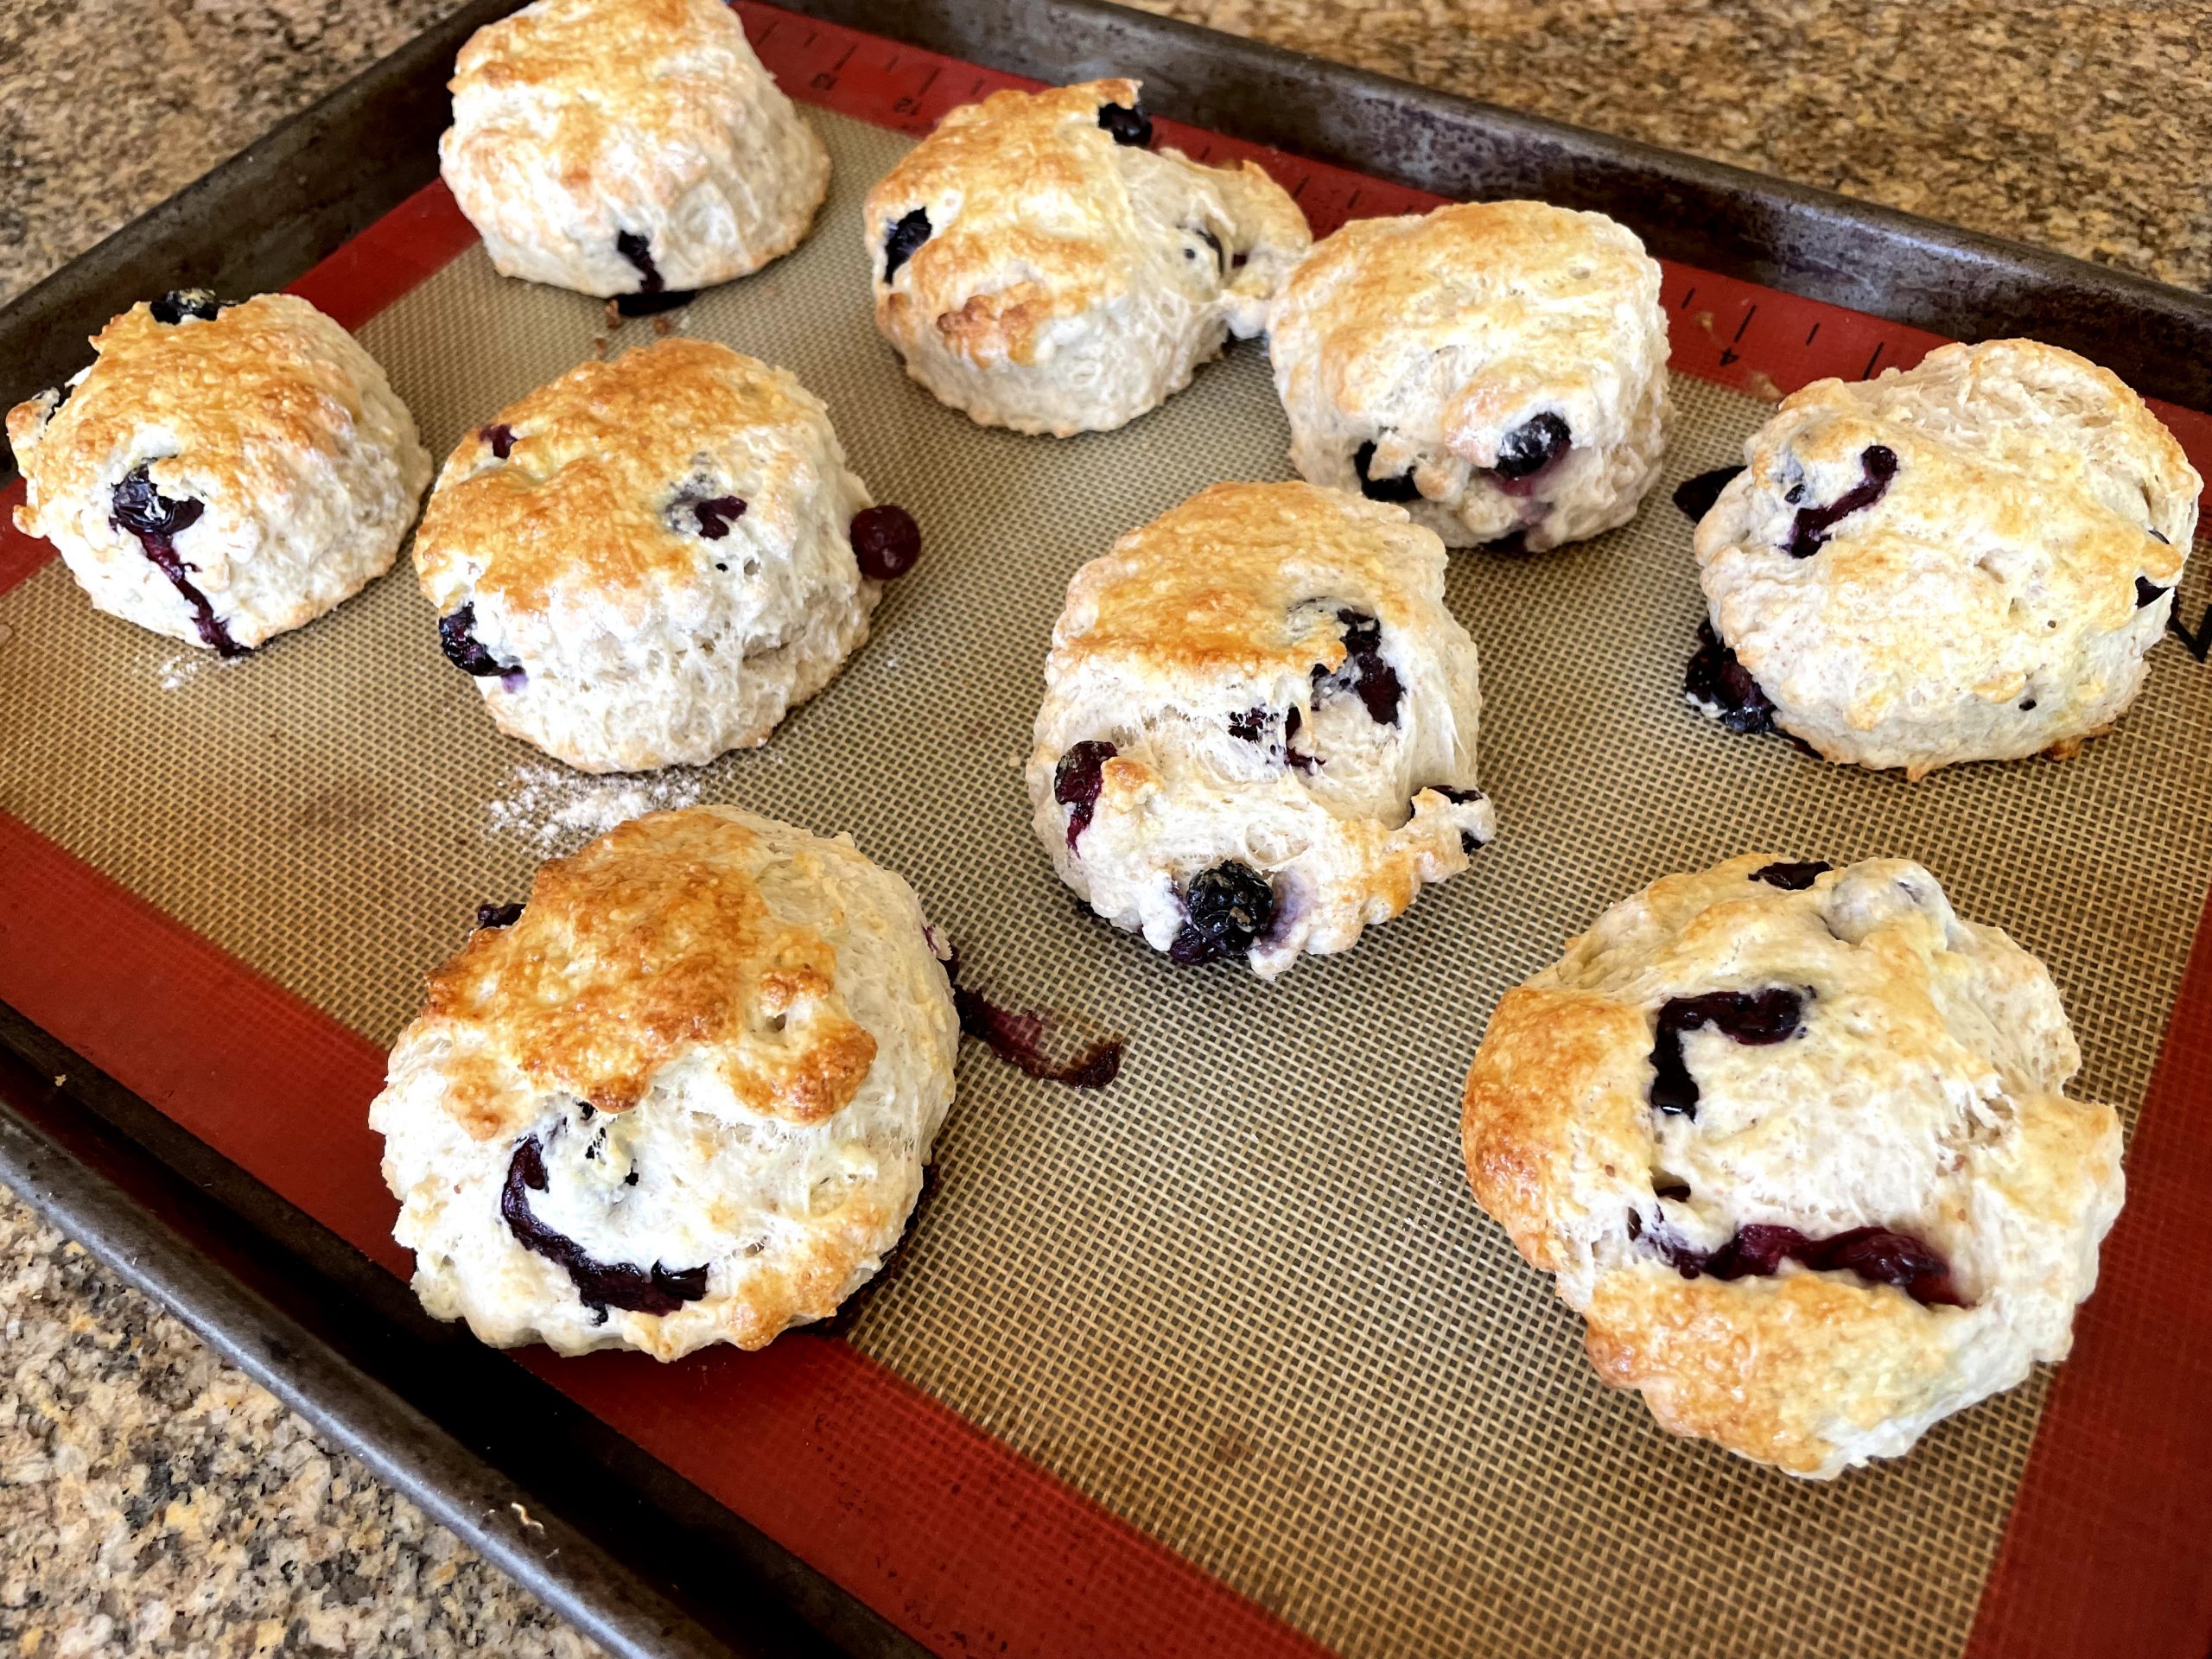 Baked scones with egg wash.